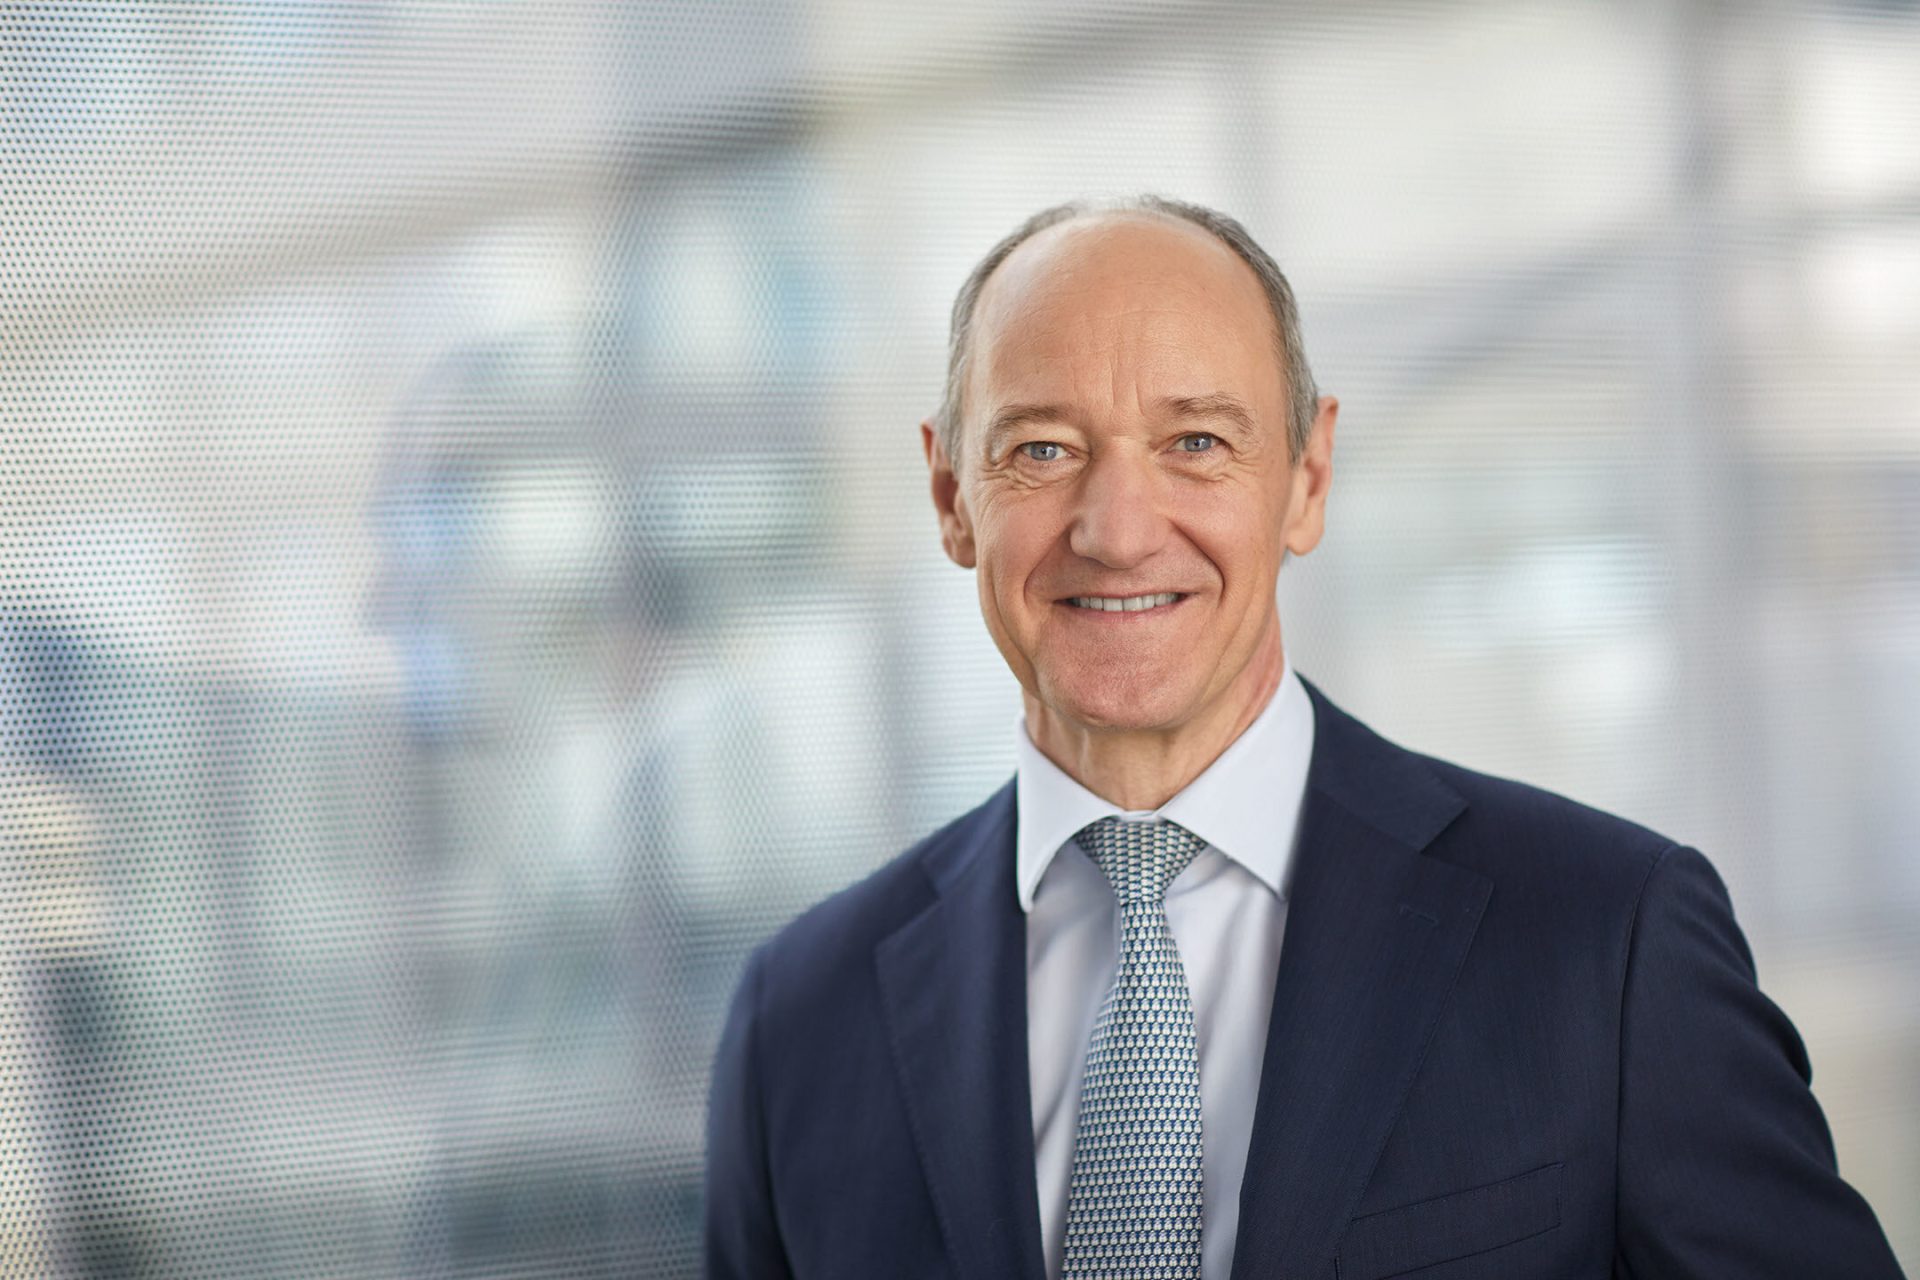 Dr. Roland Busch, President of CEO of Siemens AG